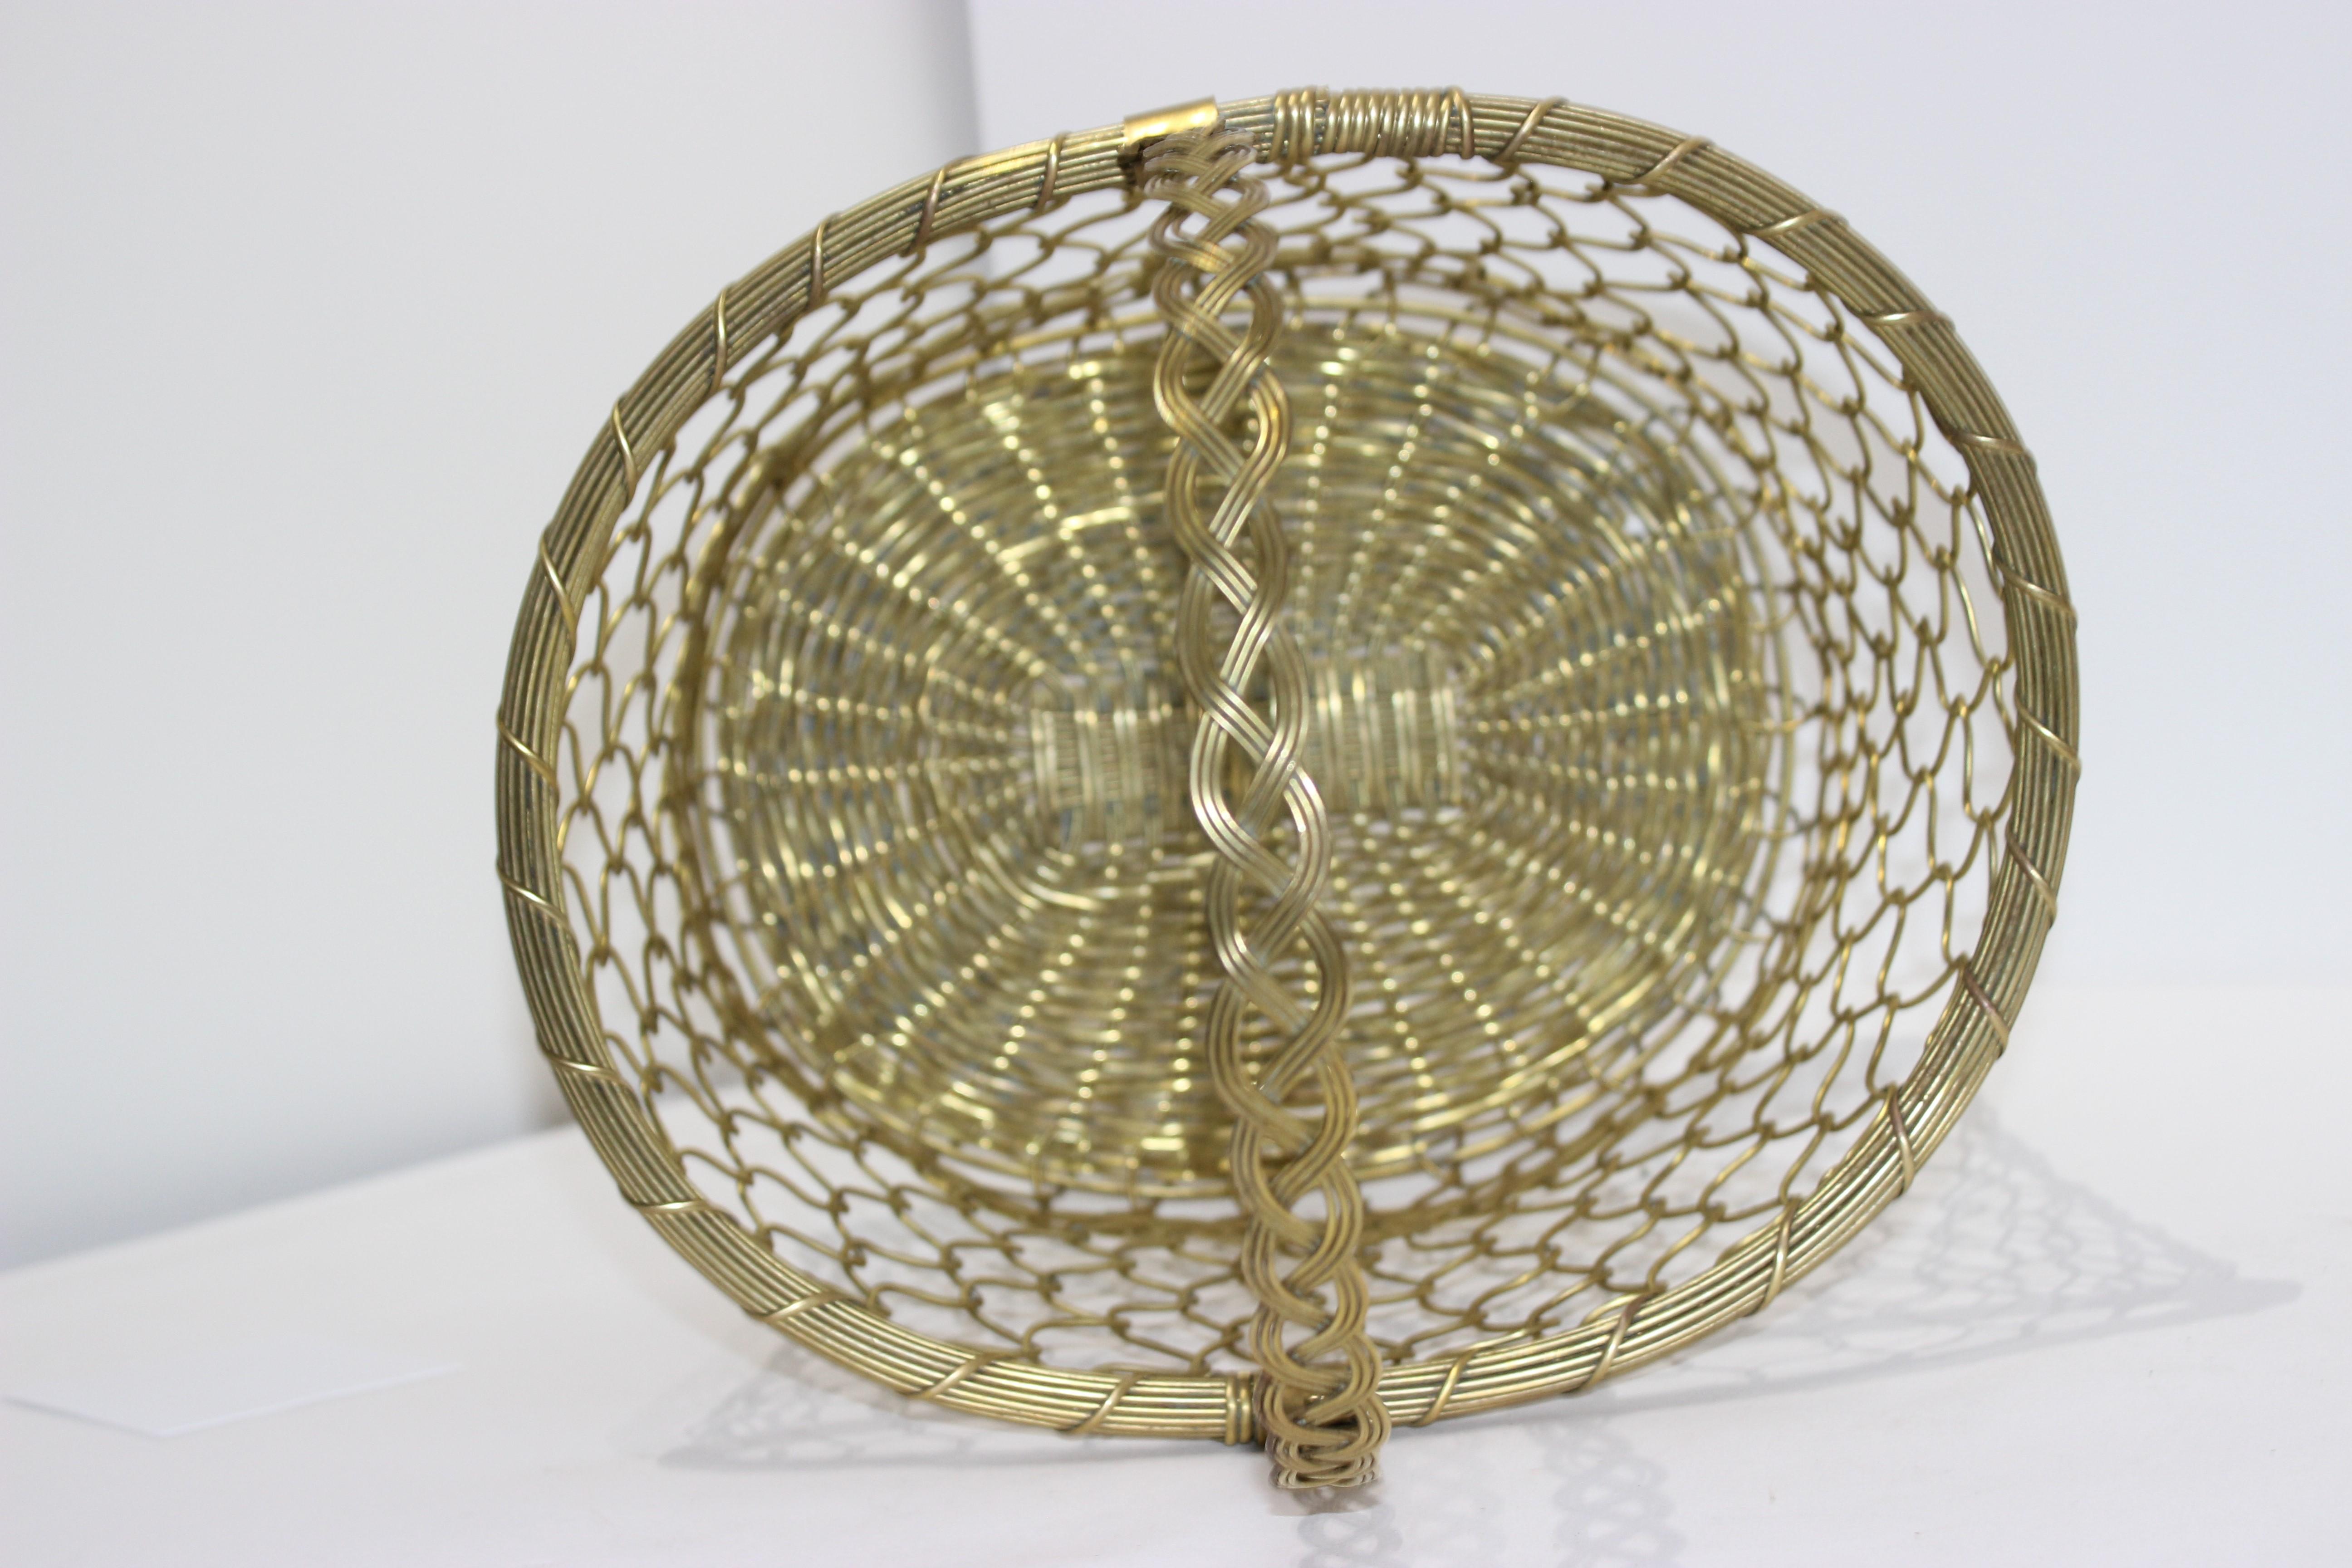 French Country Woven Brass Basket, Mid-20th Century For Sale 1